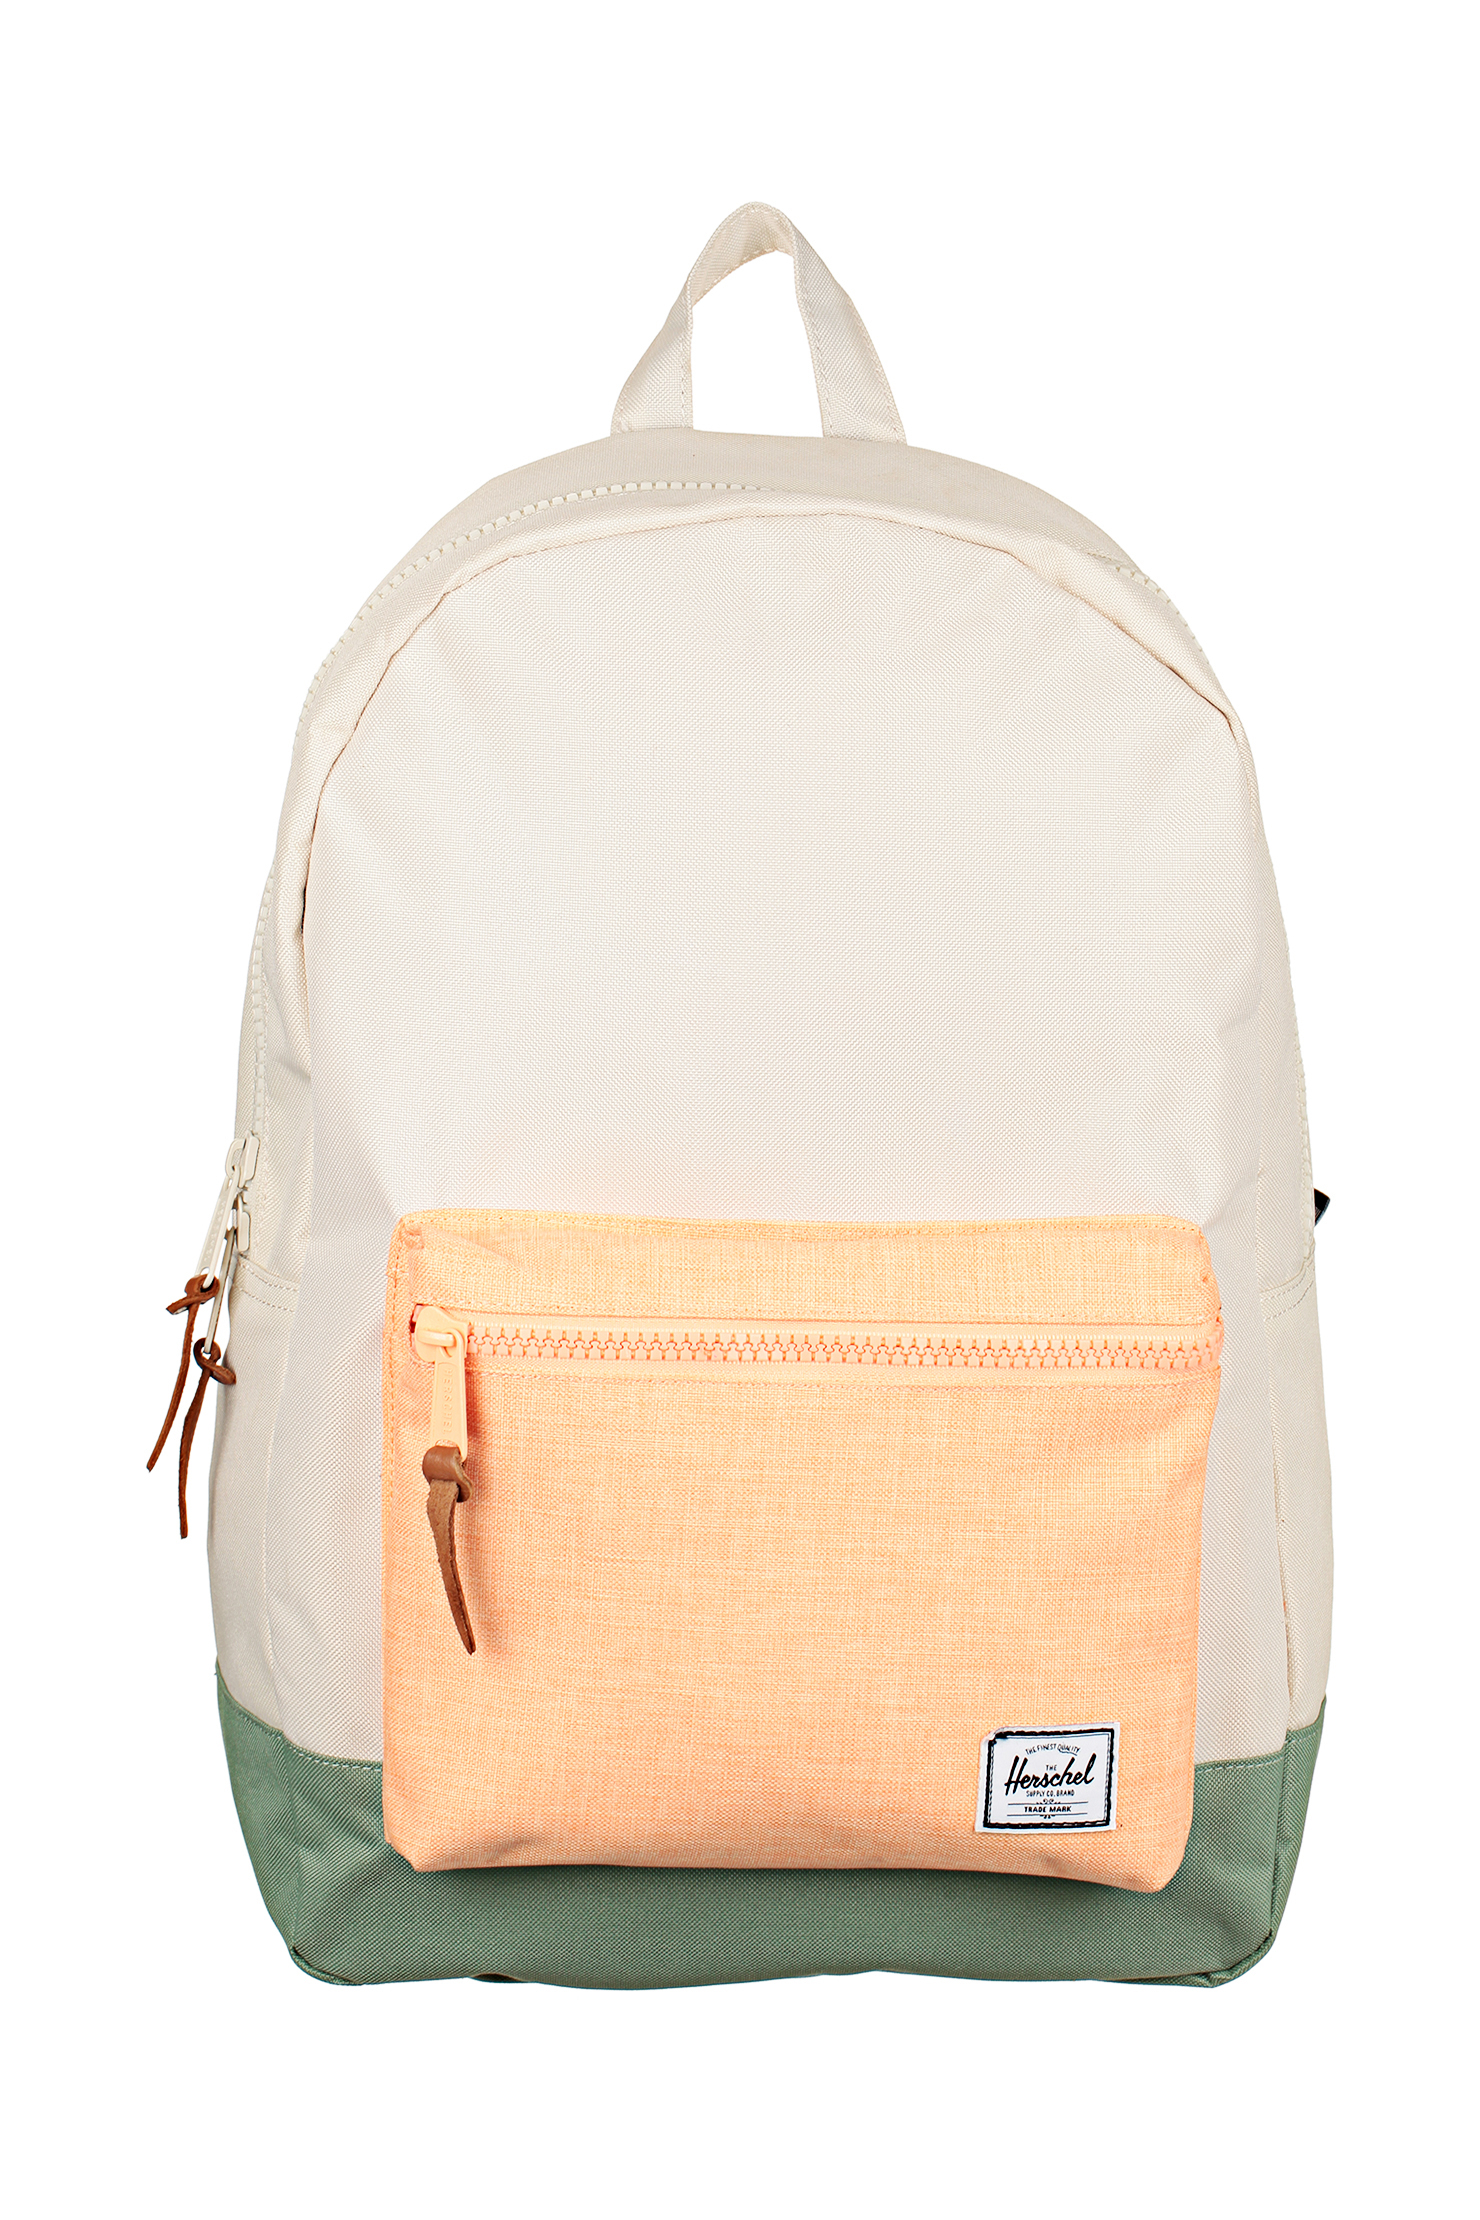 Herschel Supply Co Backpack 10005 00636 Os In White Lyst